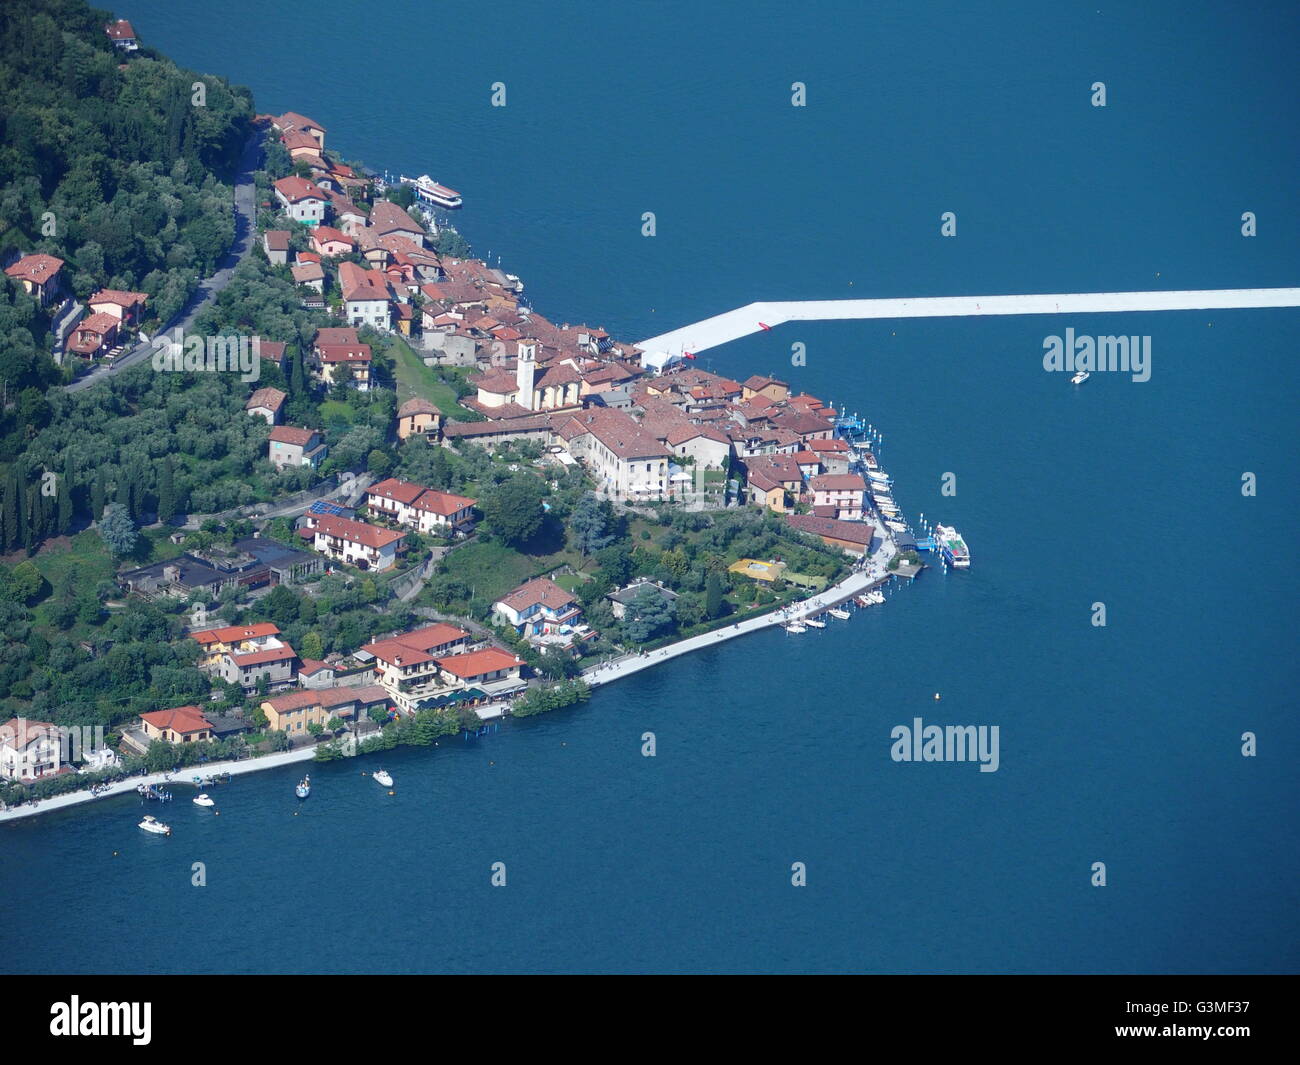 Iseo Lake, Italy. 12th June, 2016. Aerial view of Christo's "The Floating piers" project are now completed but not yet accessed by people. The piers are made up of floating polyethylene cubes and covered with fabric creating the walkways. Riccardo Mottola/Alamy Live News Stock Photo